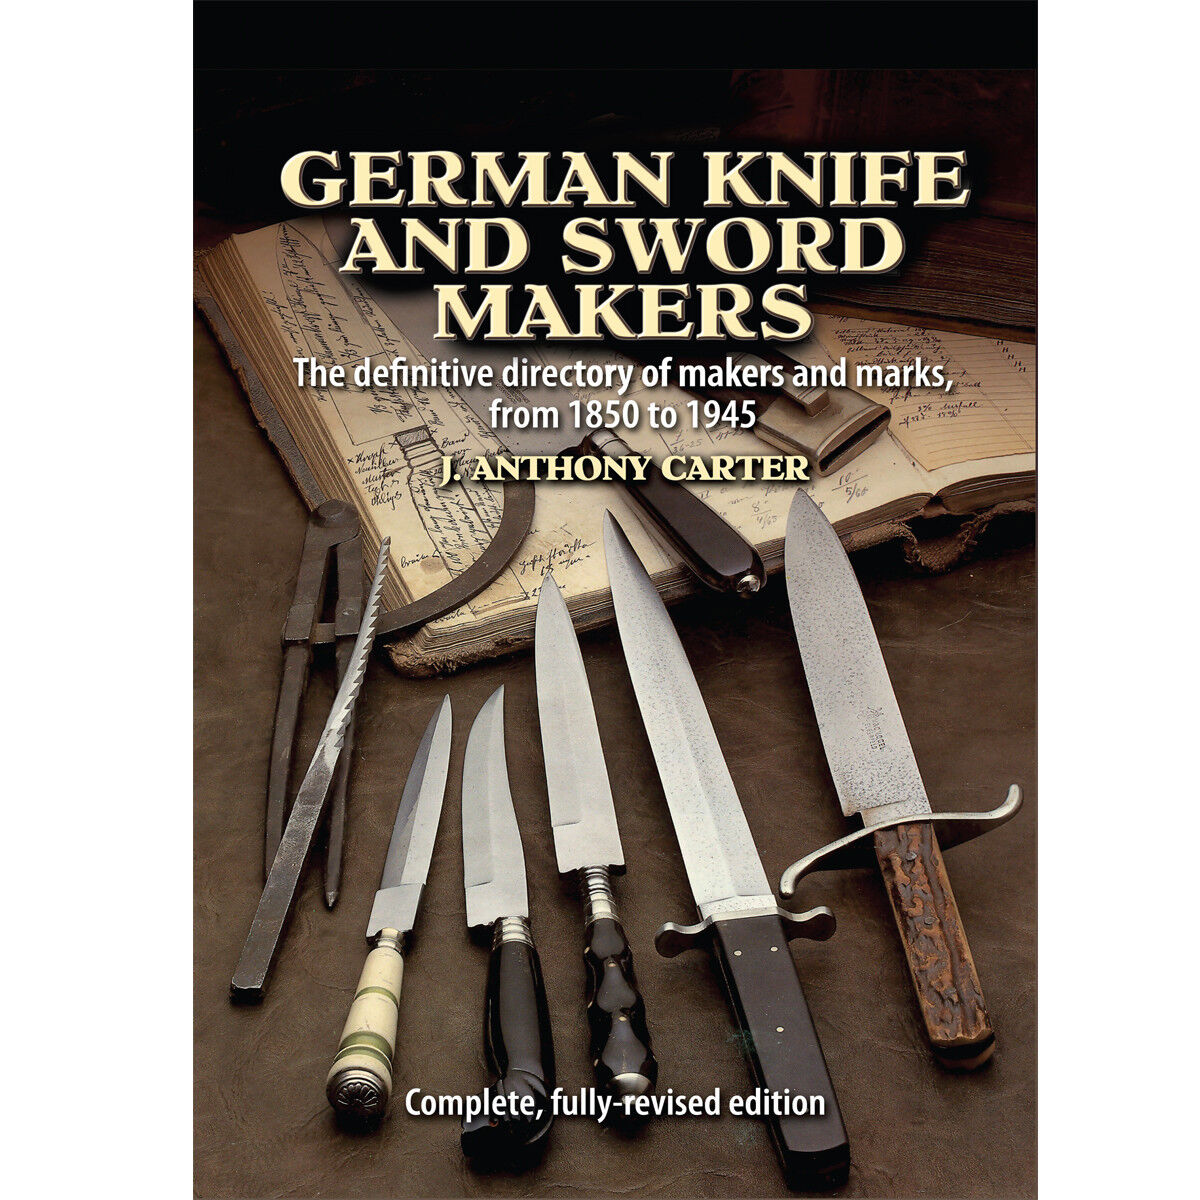 German Knife and Sword Makers by J. Anthony Carter - Complete Edition A to Z